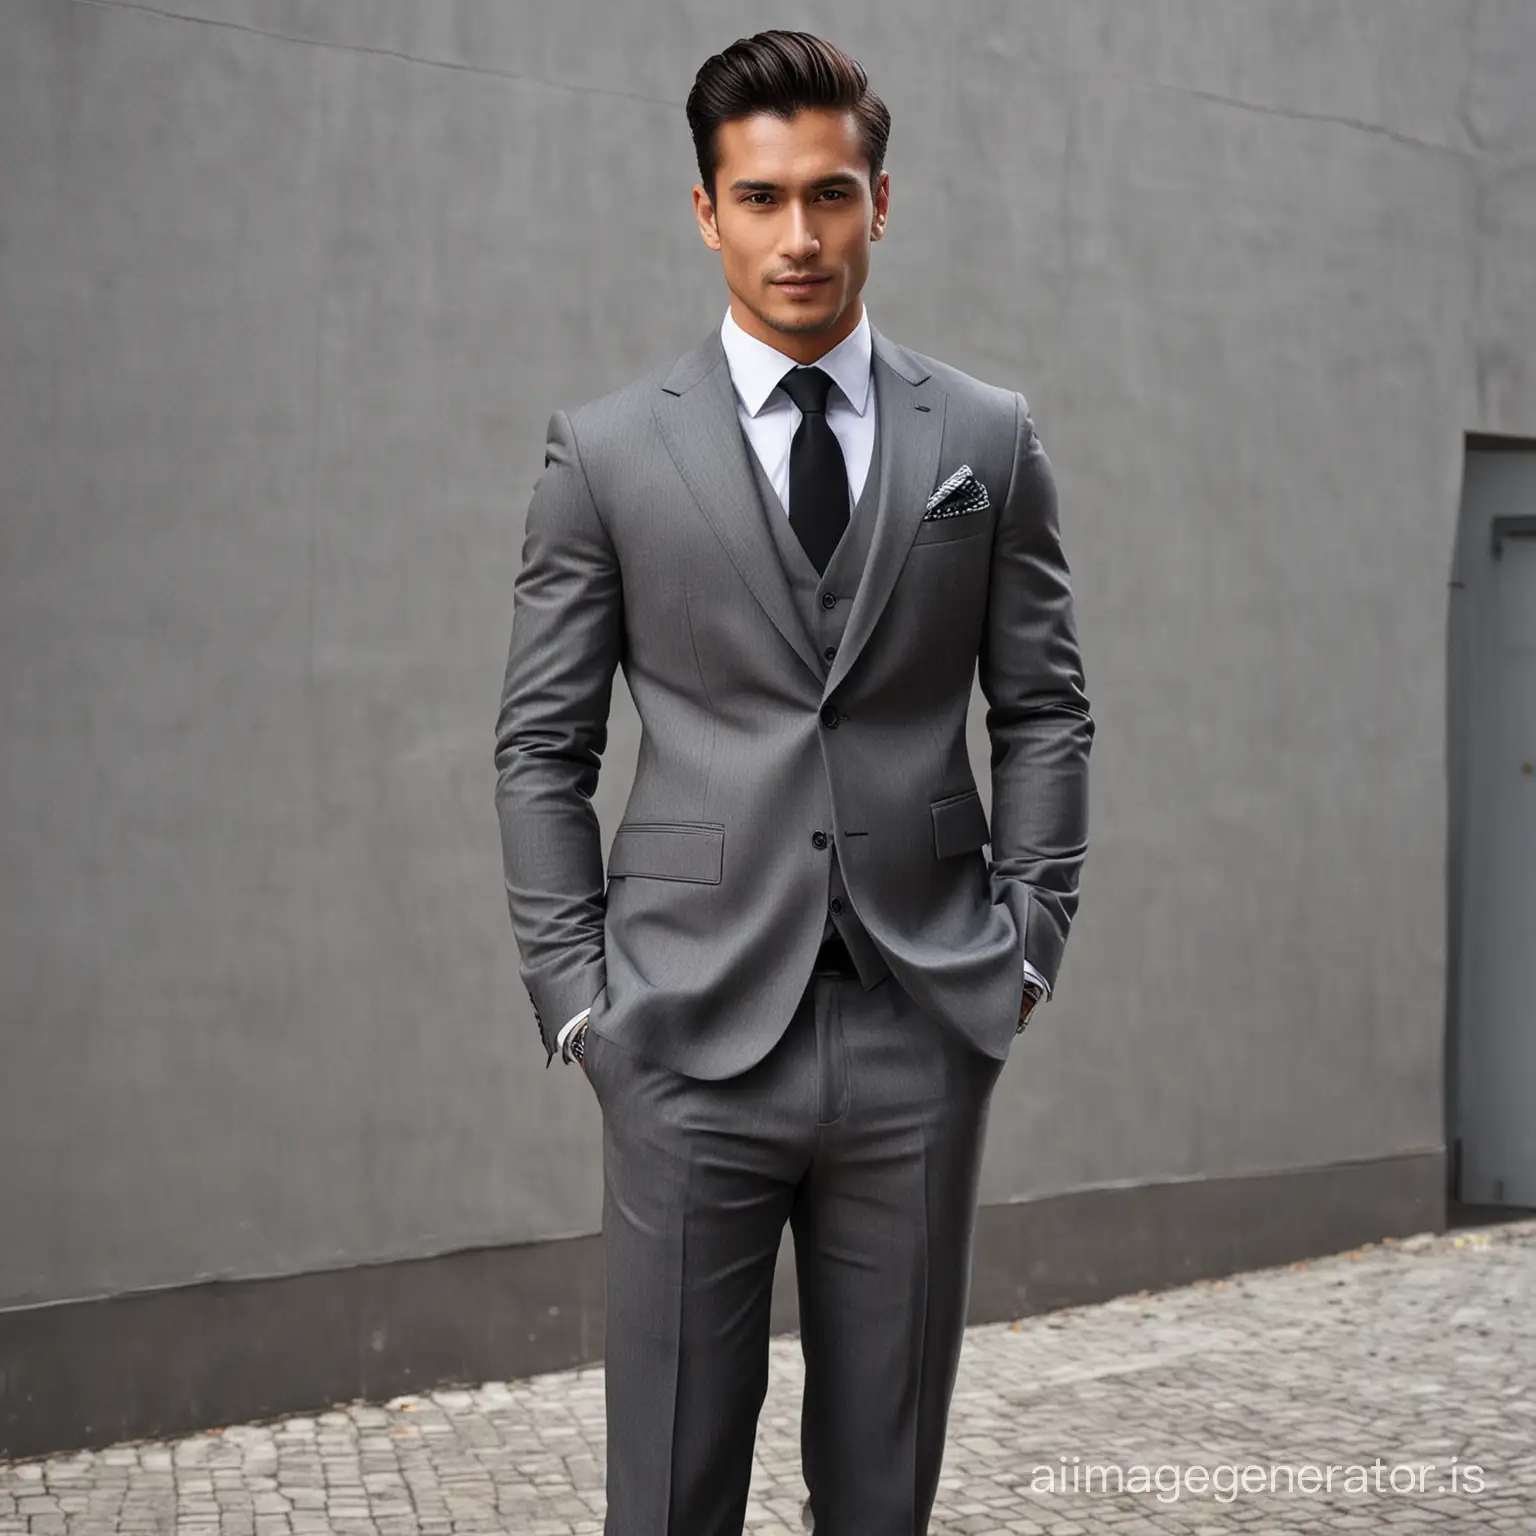 Stylish-Malaysian-Businessman-in-Grey-Suit-and-Black-Shirt